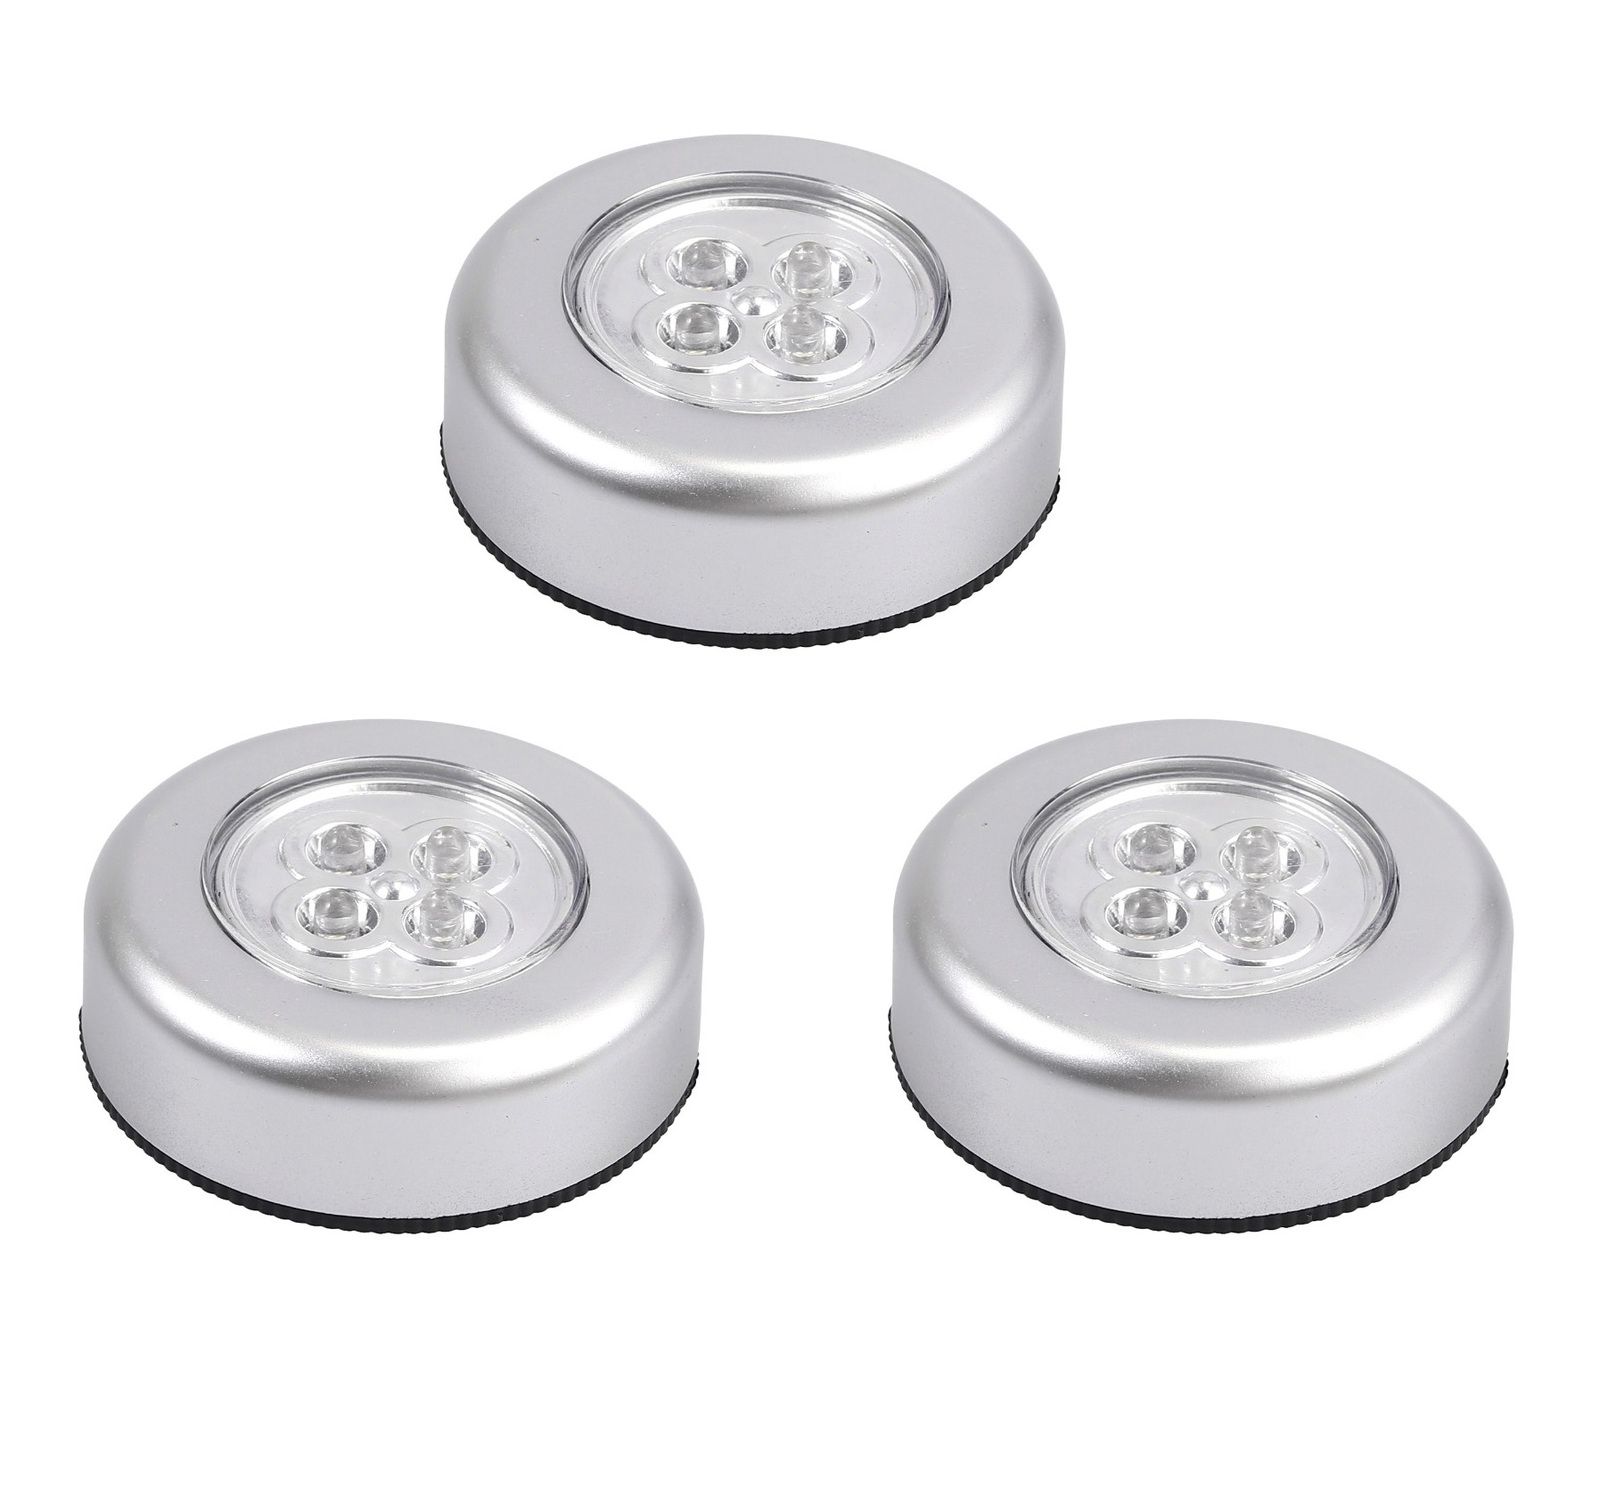 3 x Touch Control Night Light 4 LED Round Lamps 